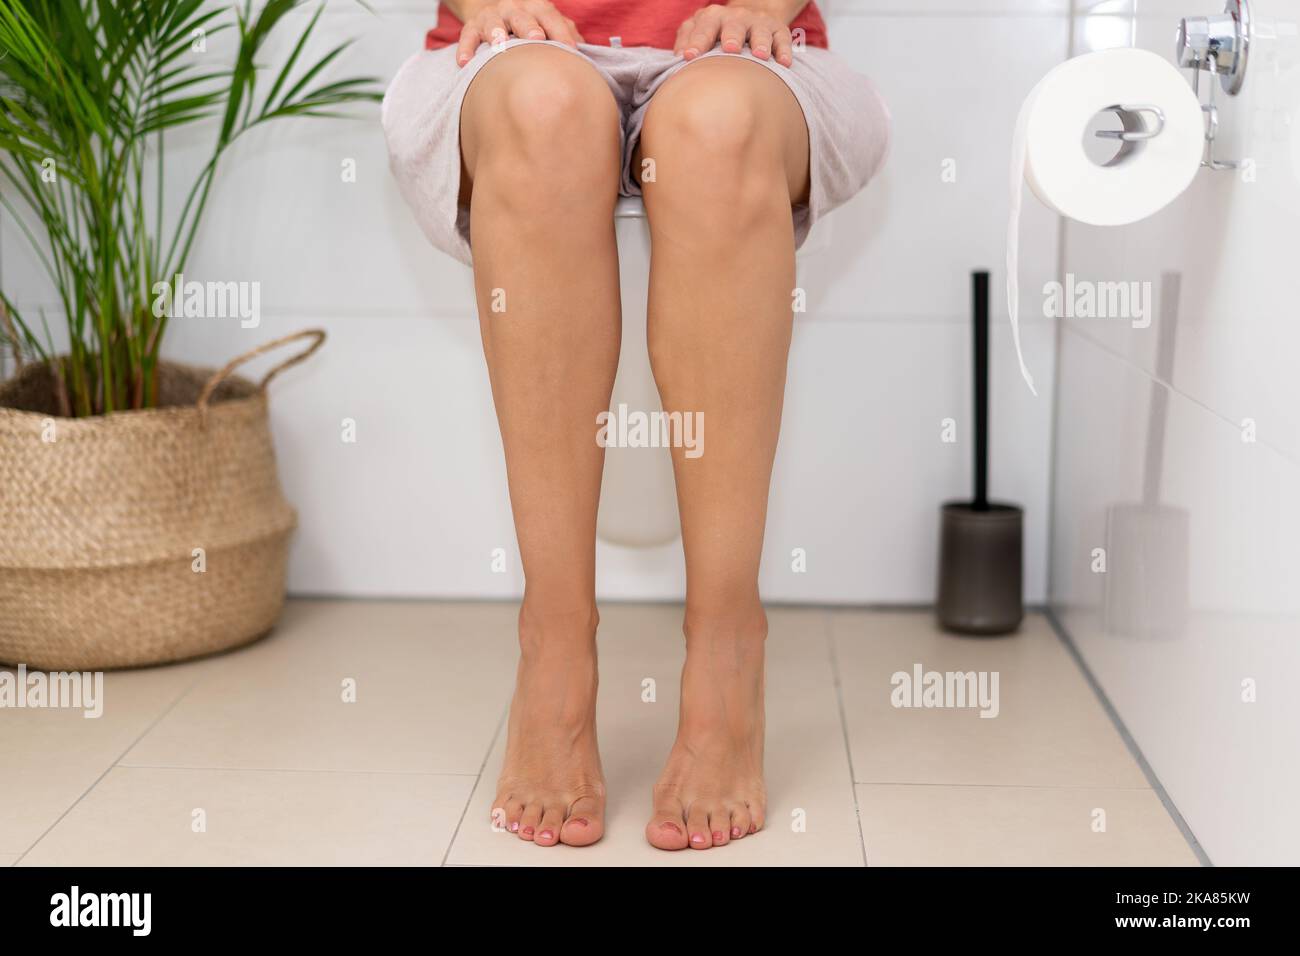 Woman sitting on the toilet. Unhealthy positions for defecation. Stock Photo